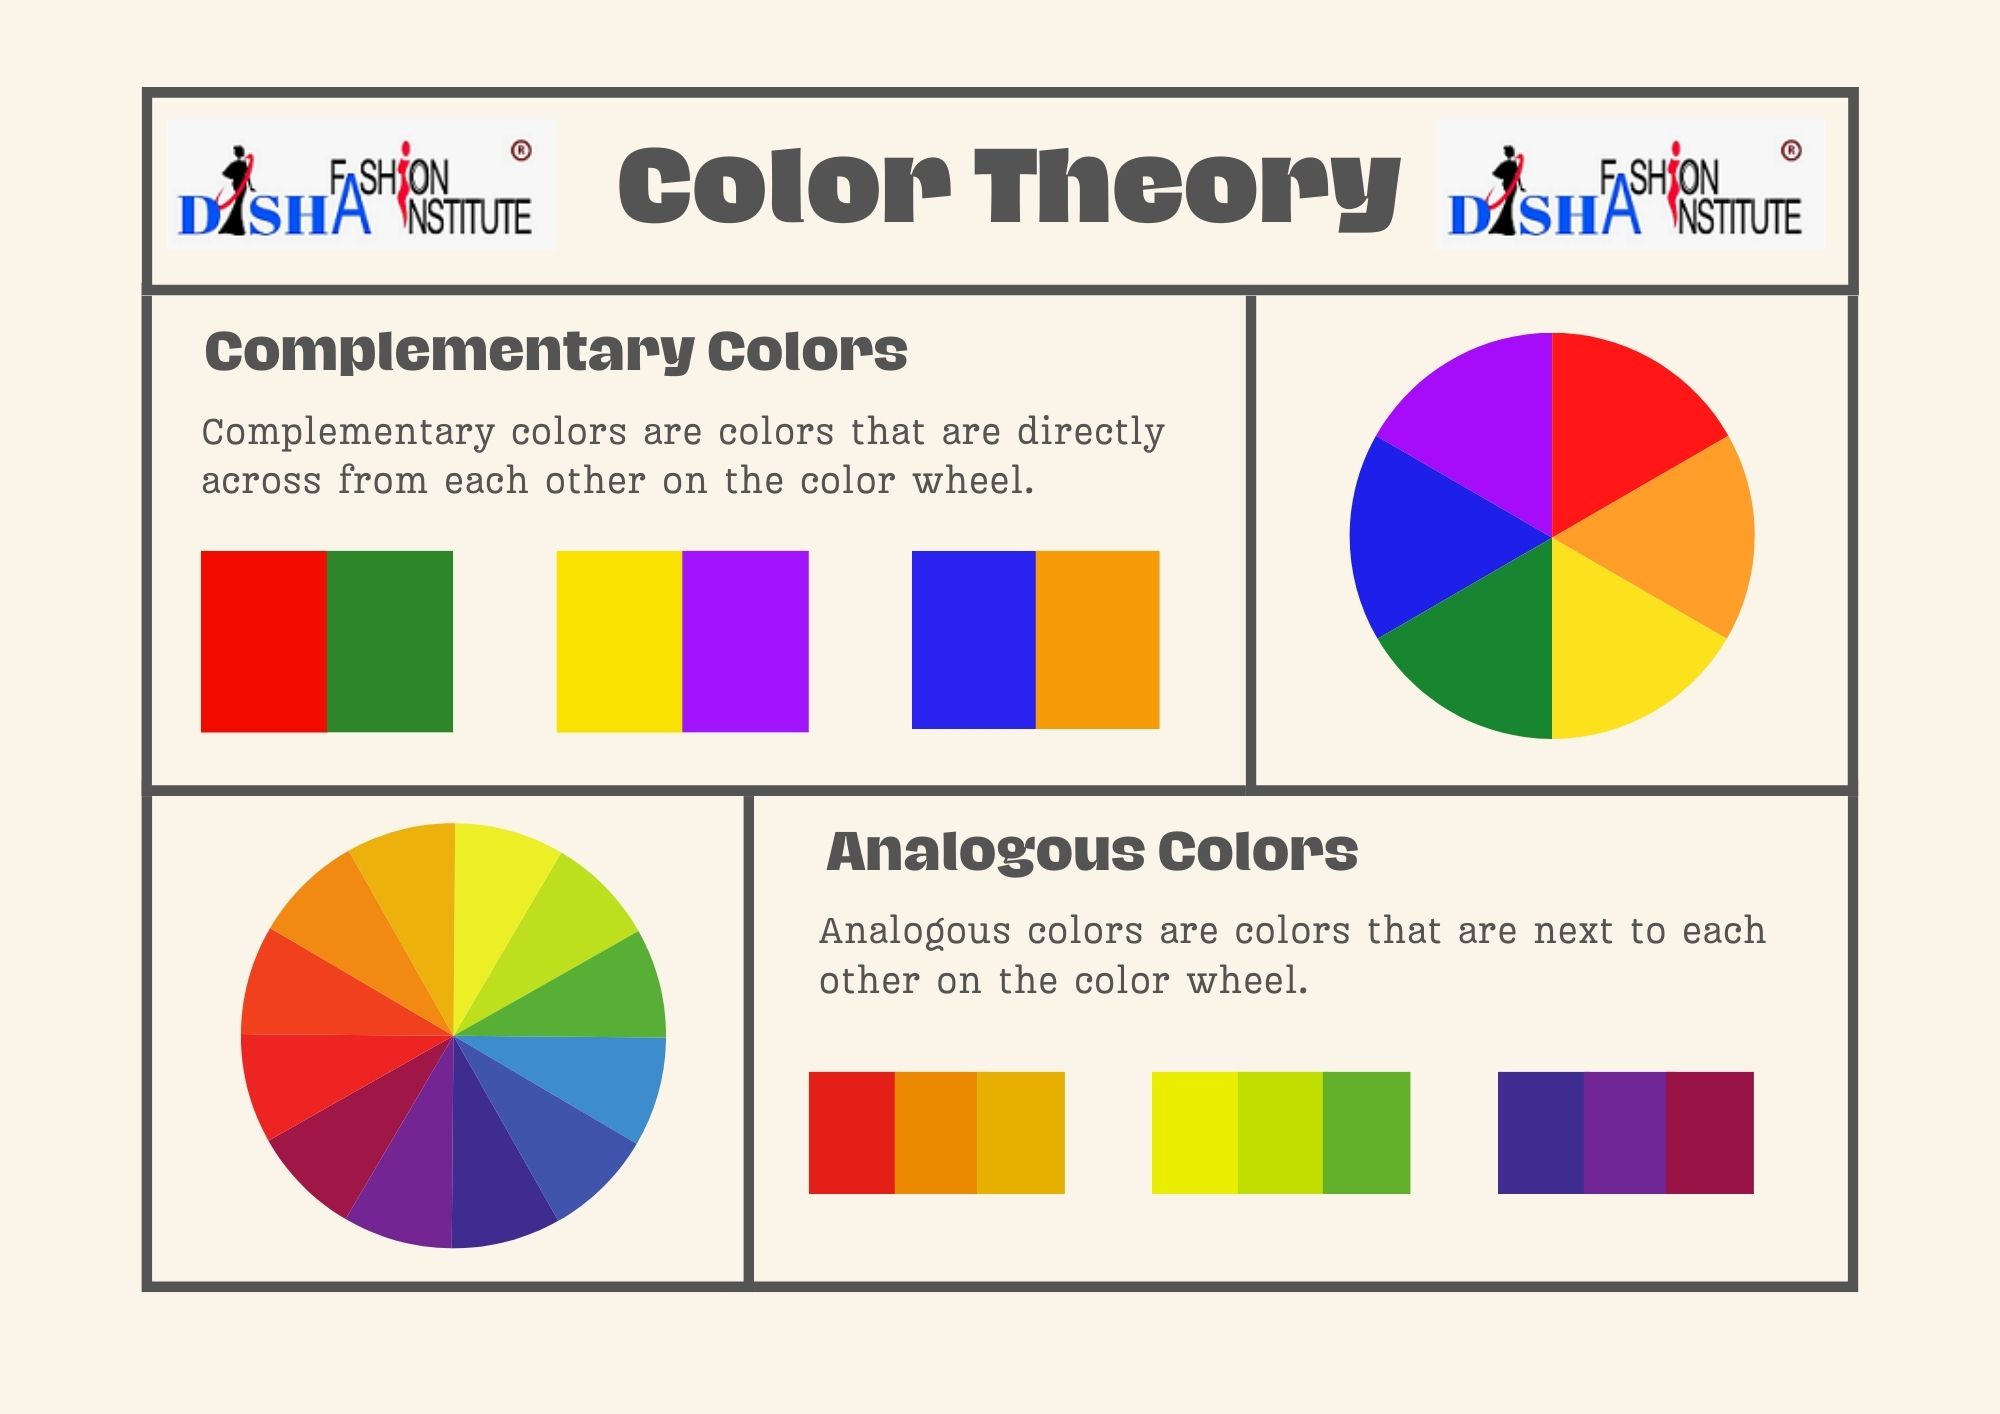 Color Theory in Fashion Design